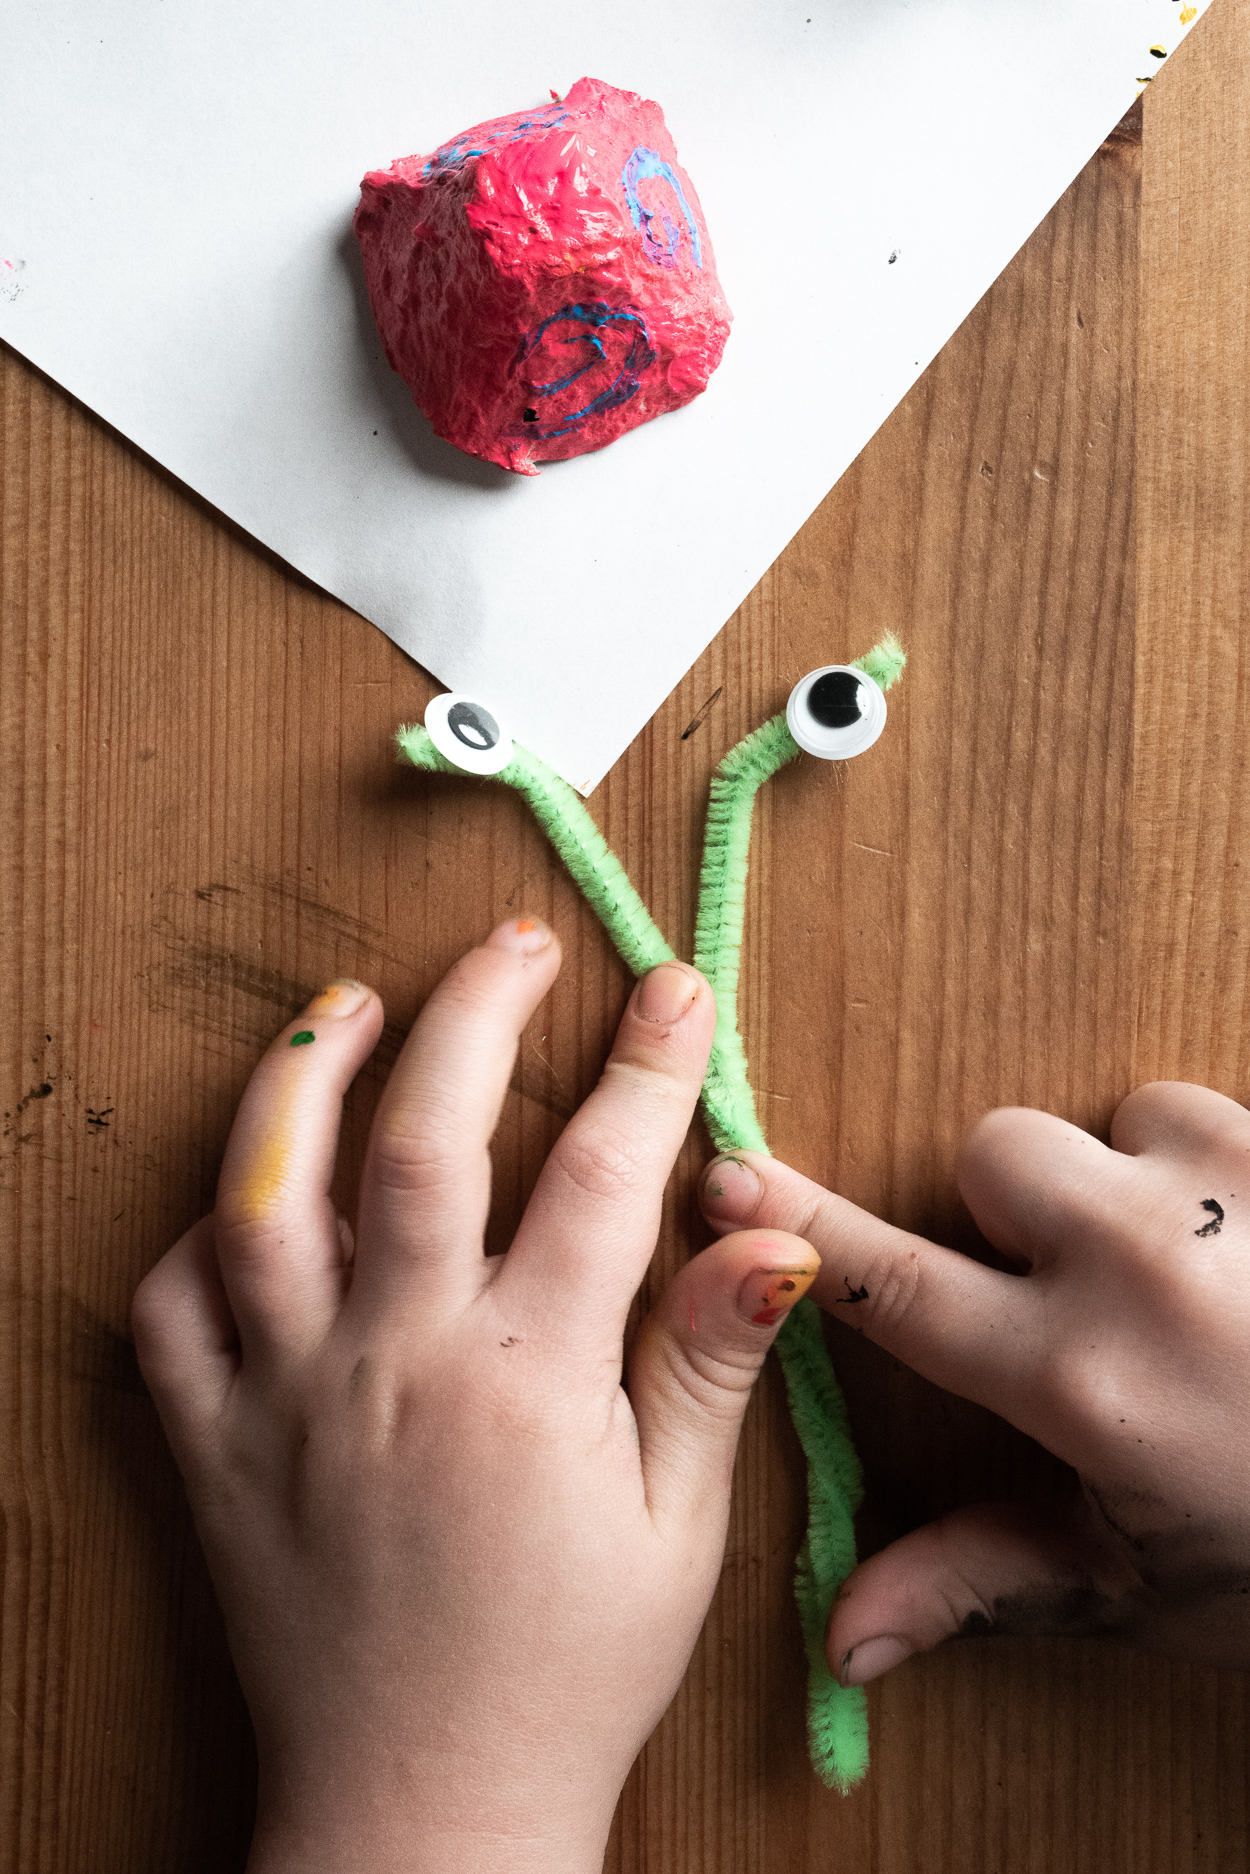 Decorate the snail piece with two green pipe cleaners and googly eyes placed on them – make two holes on the opposite sides of the snail and put the pipe cleaner through it to get eyes and a tail on the back.